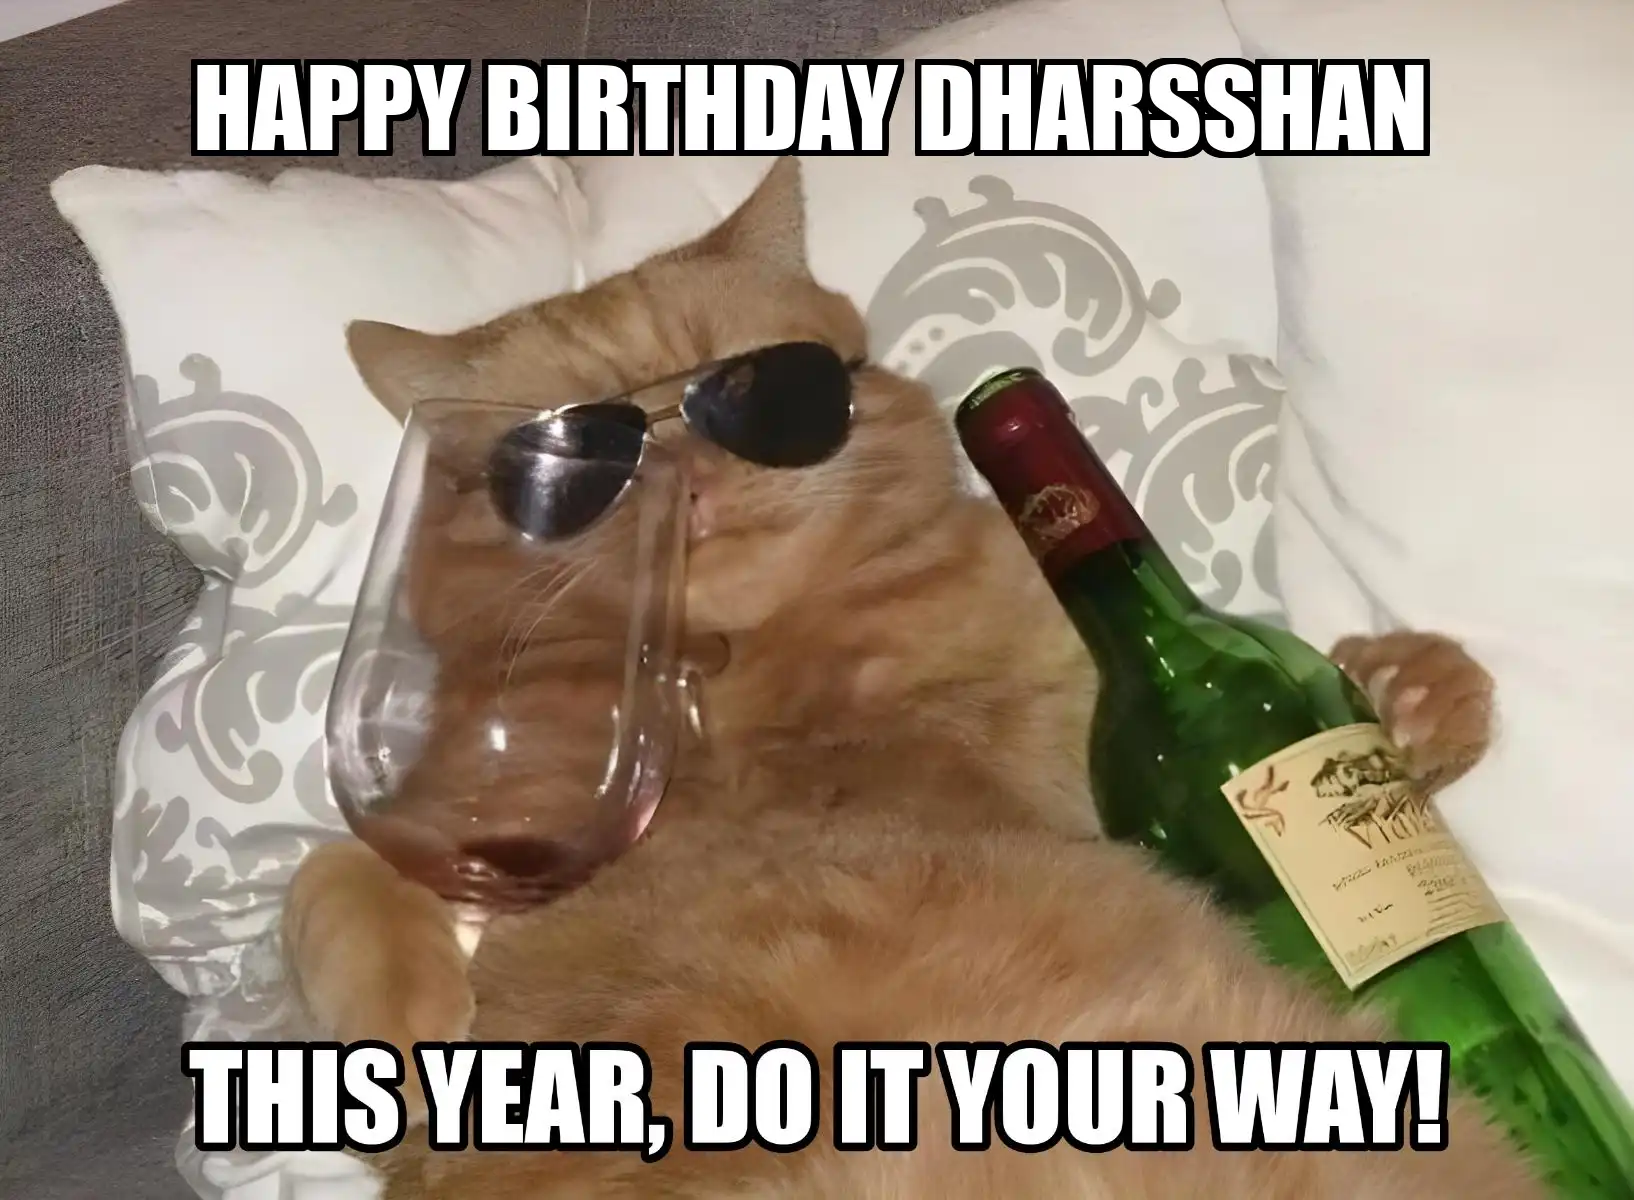 Happy Birthday Dharsshan This Year Do It Your Way Meme